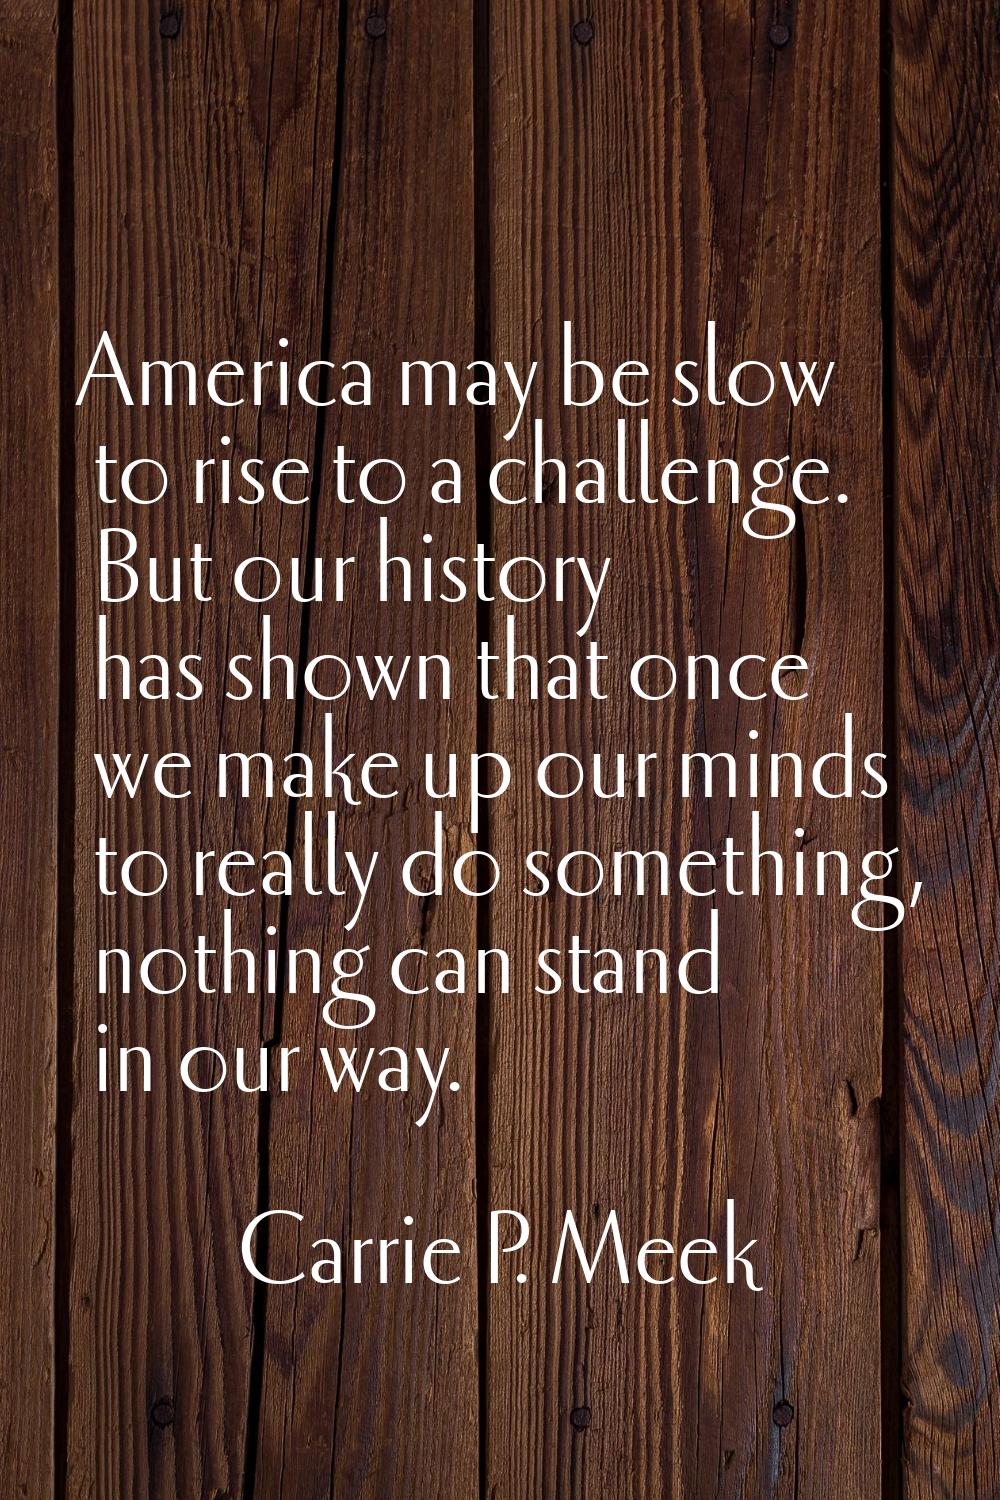 America may be slow to rise to a challenge. But our history has shown that once we make up our mind